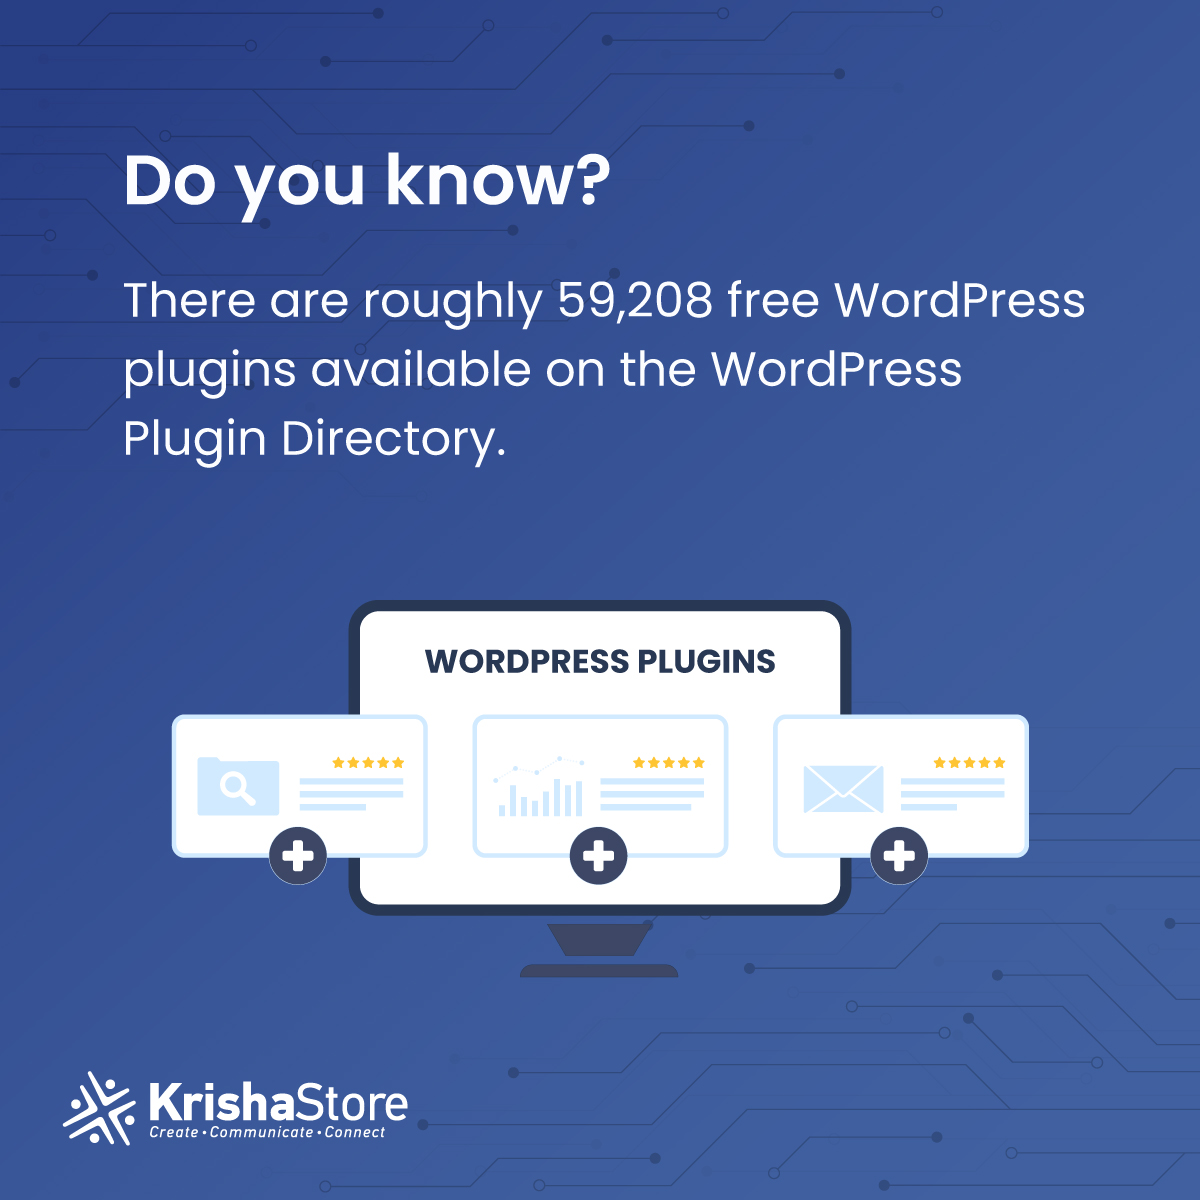 Have you chosen your go-to plugin from the directory?
 
#doyouknow #stats #wordpressplugins #wordpress #directory #wordpressdirectory #plugins #wordpressdevelopers #website #KrishaStore